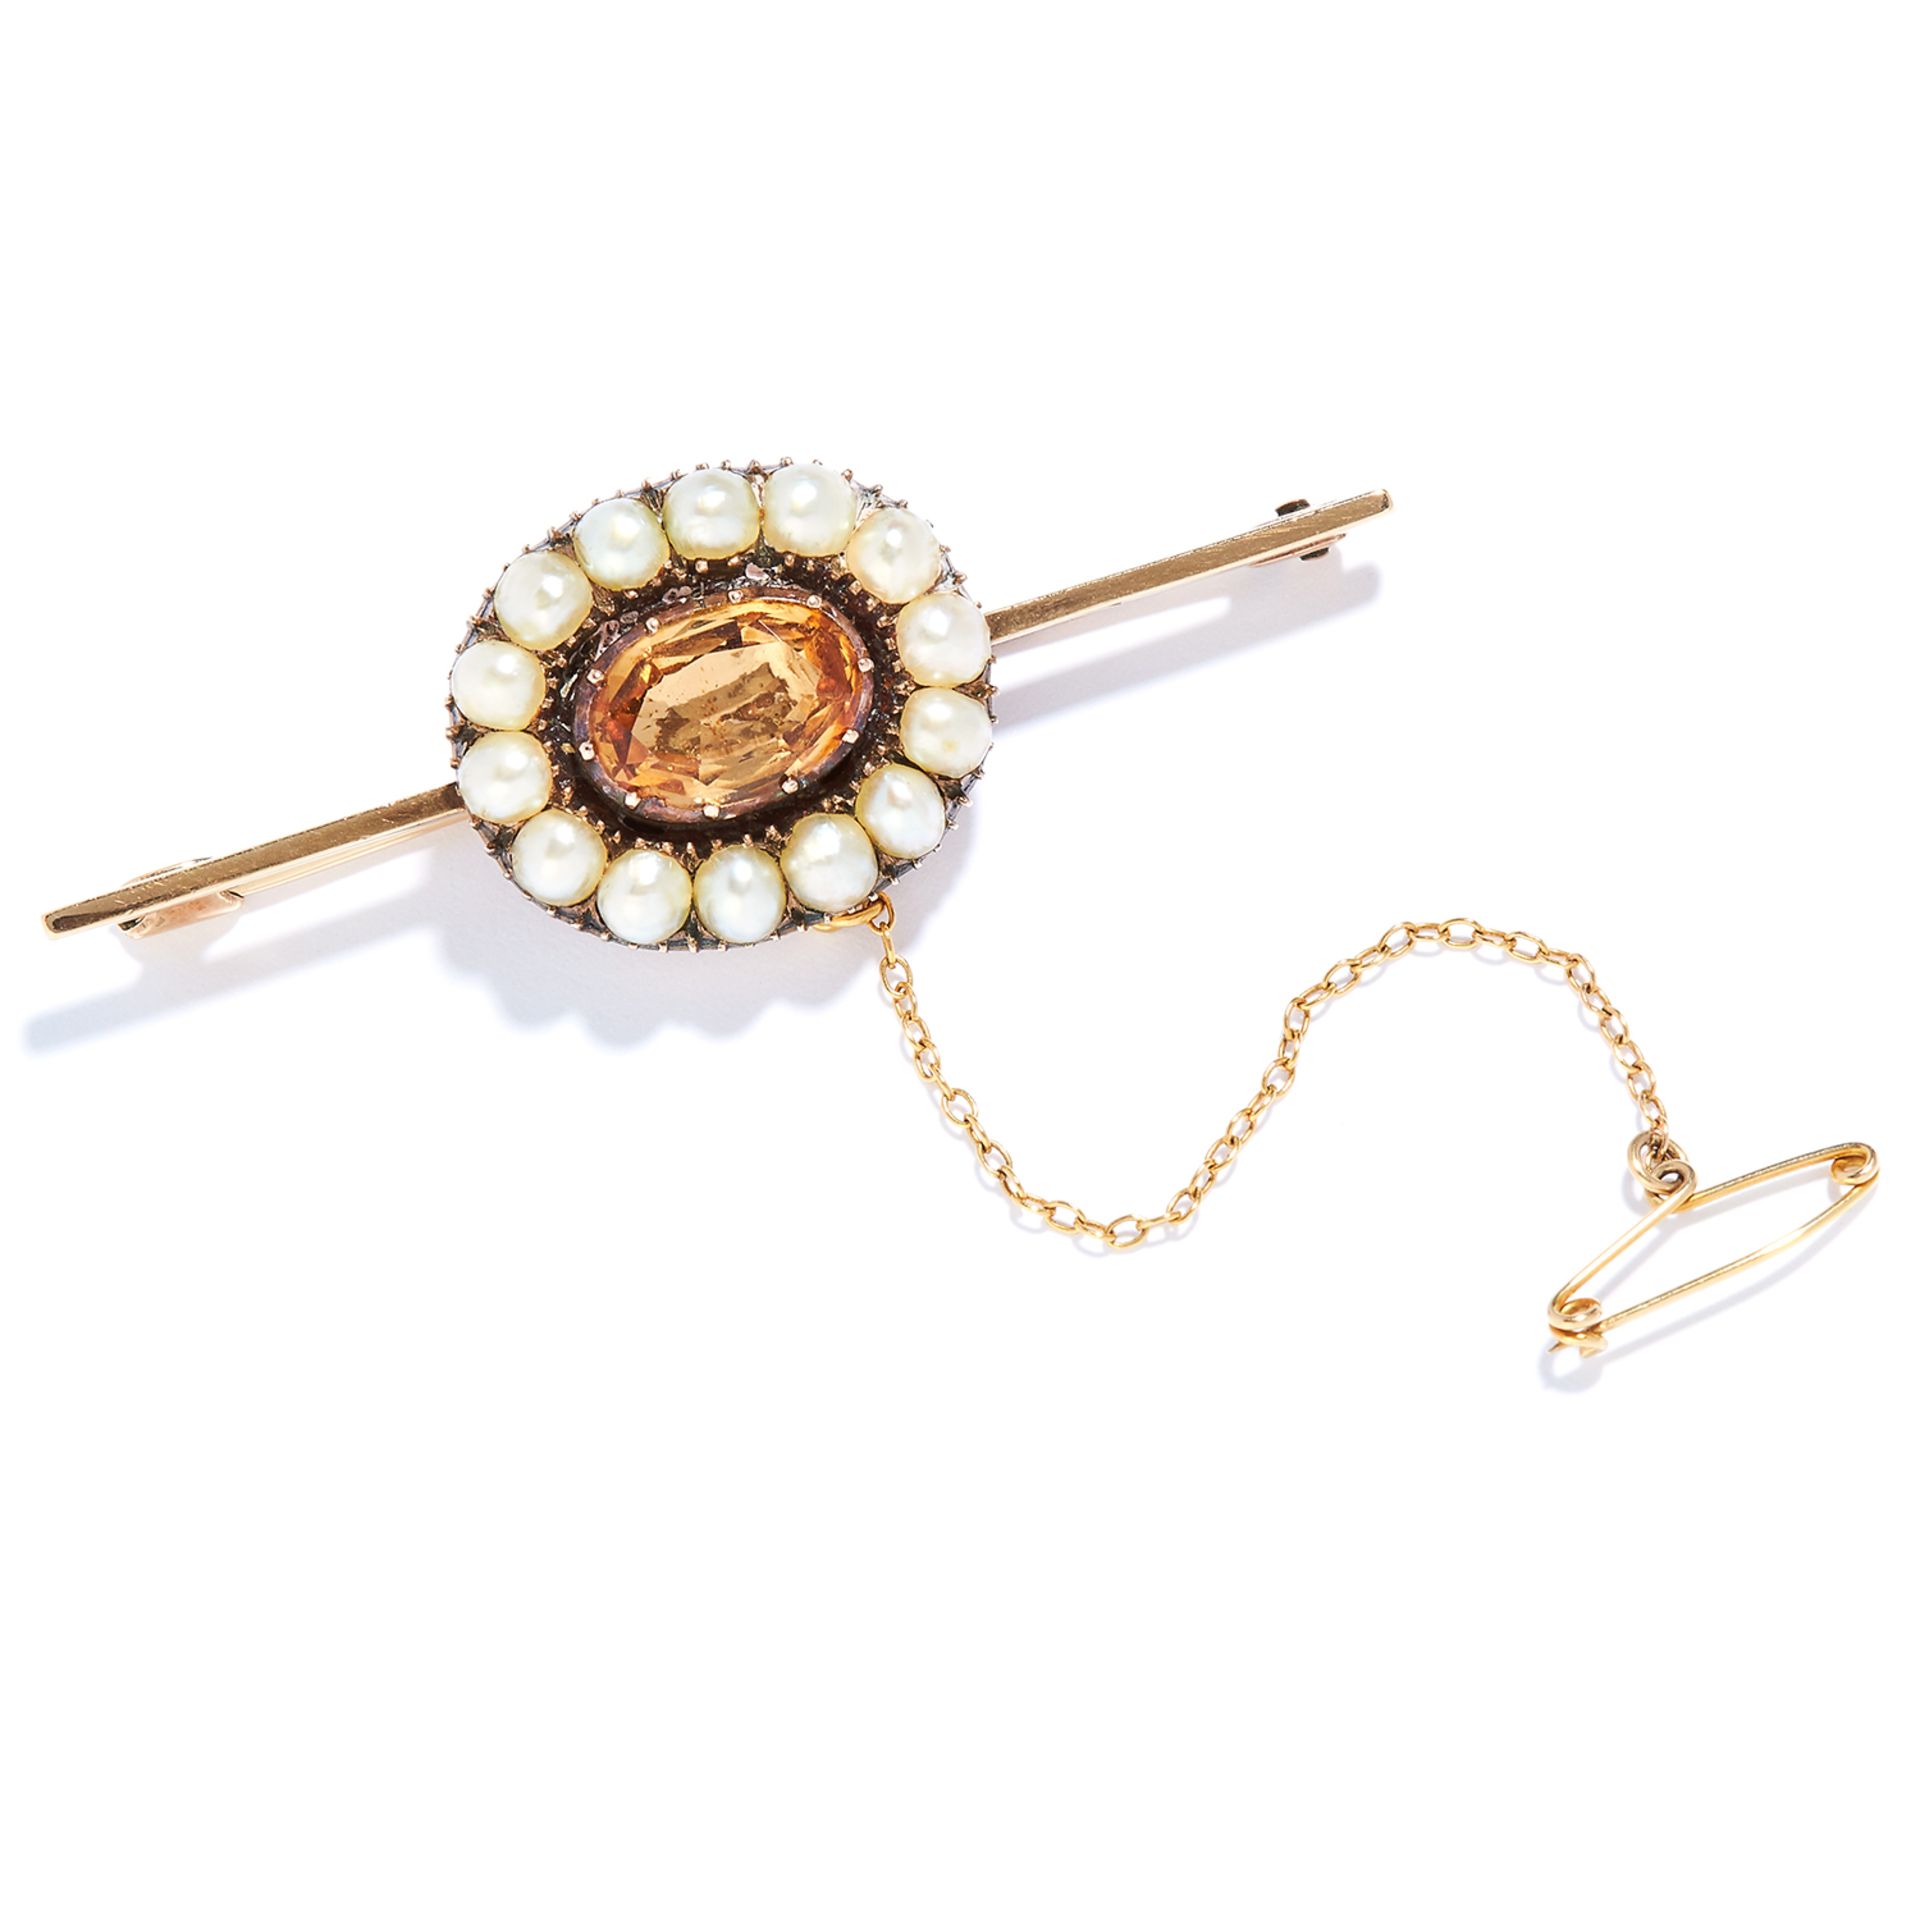 ANTIQUE IMPERIAL TOPAZ AND PEARL BAR BROOCH in high carat yellow gold, set with an oval cut topaz in